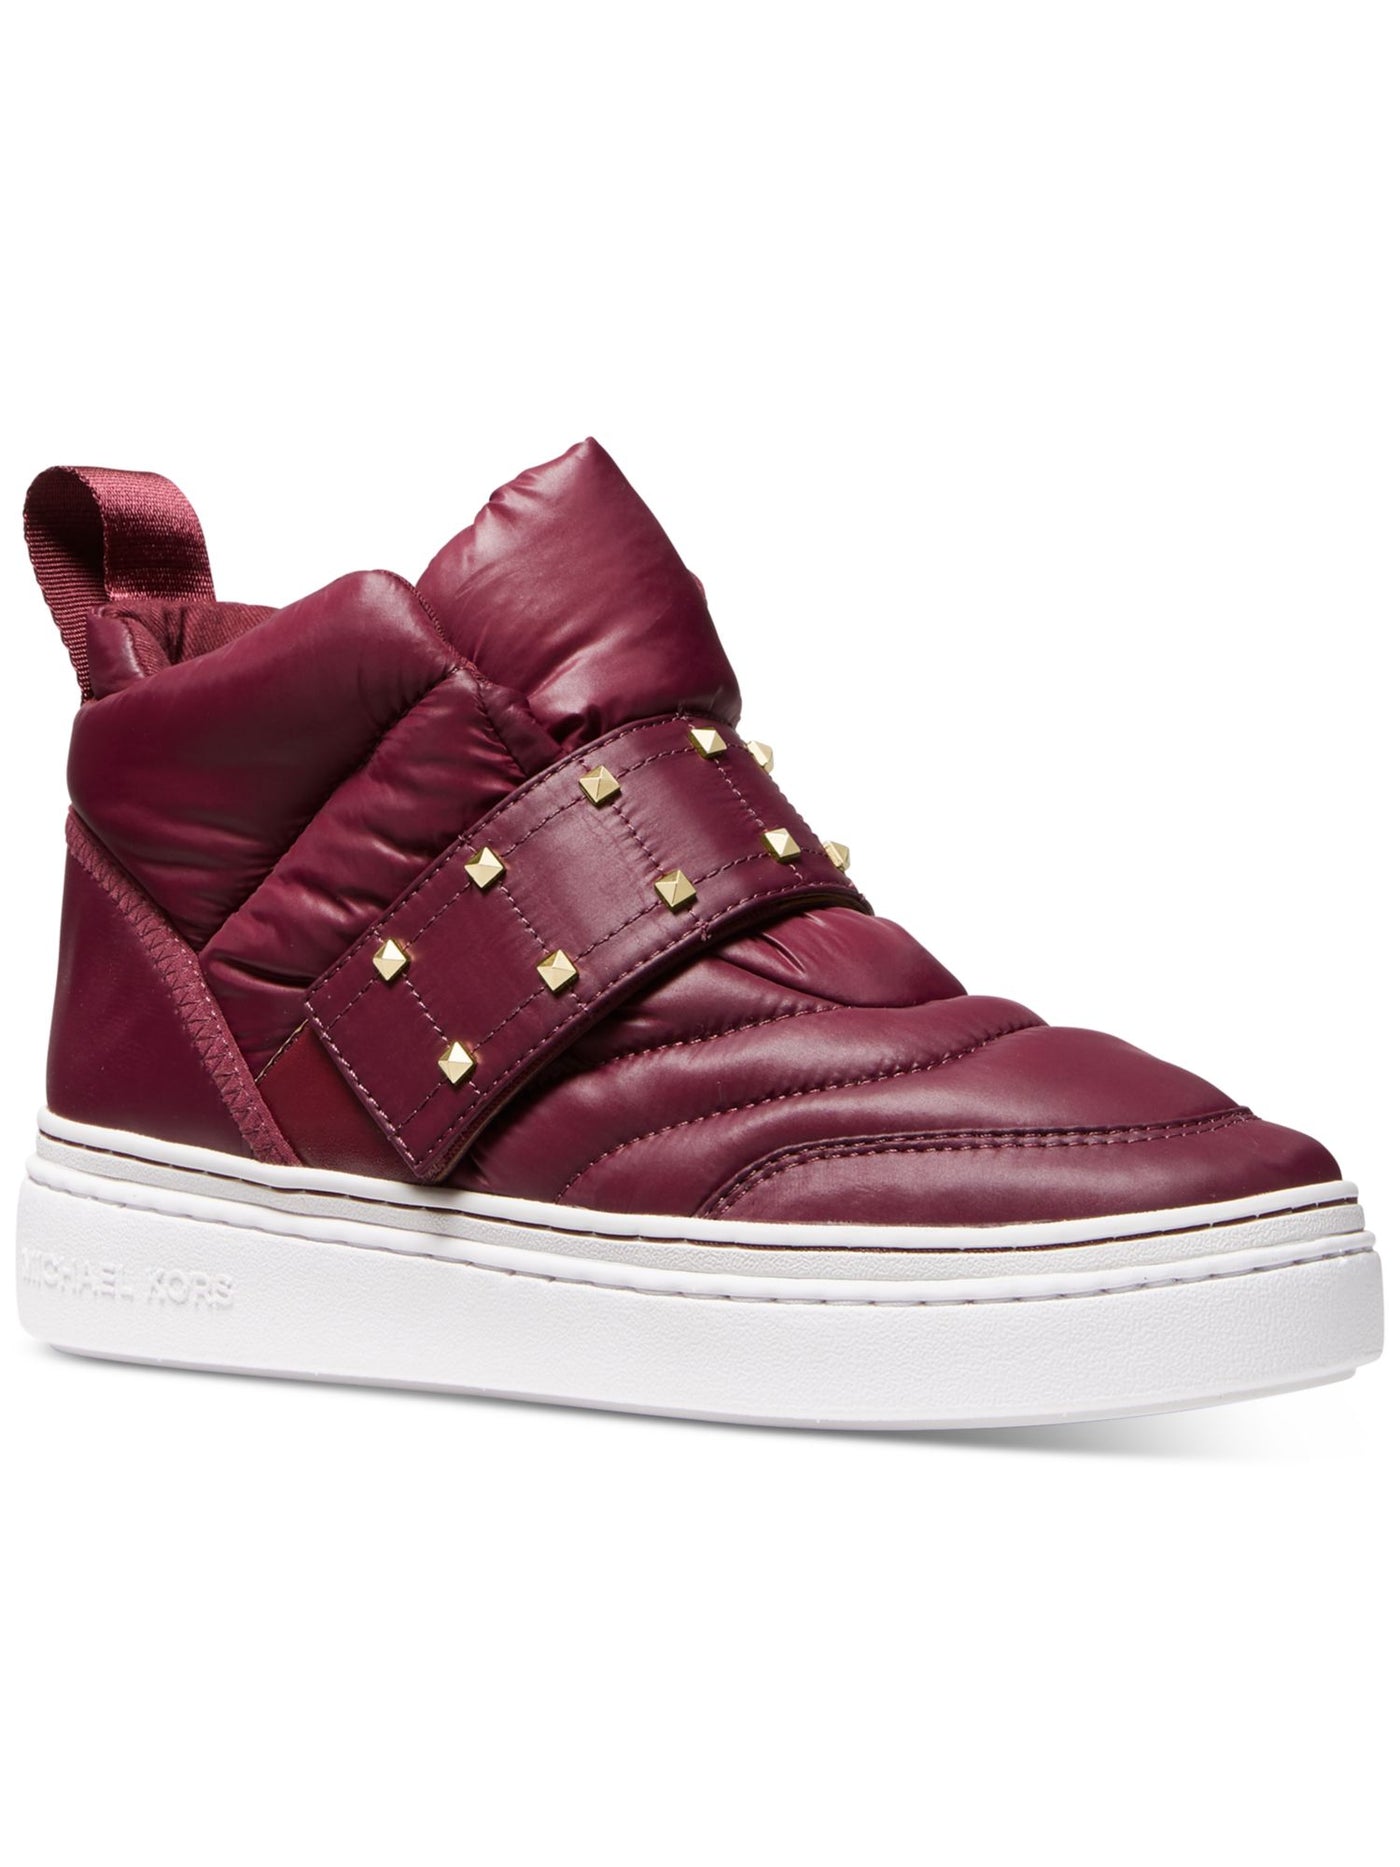 MICHAEL MICHAEL KORS Womens Burgundy Studded Strap Back Pull-Tab Quilted Cushioned Stirling Round Toe Platform Sneakers Shoes 6 M